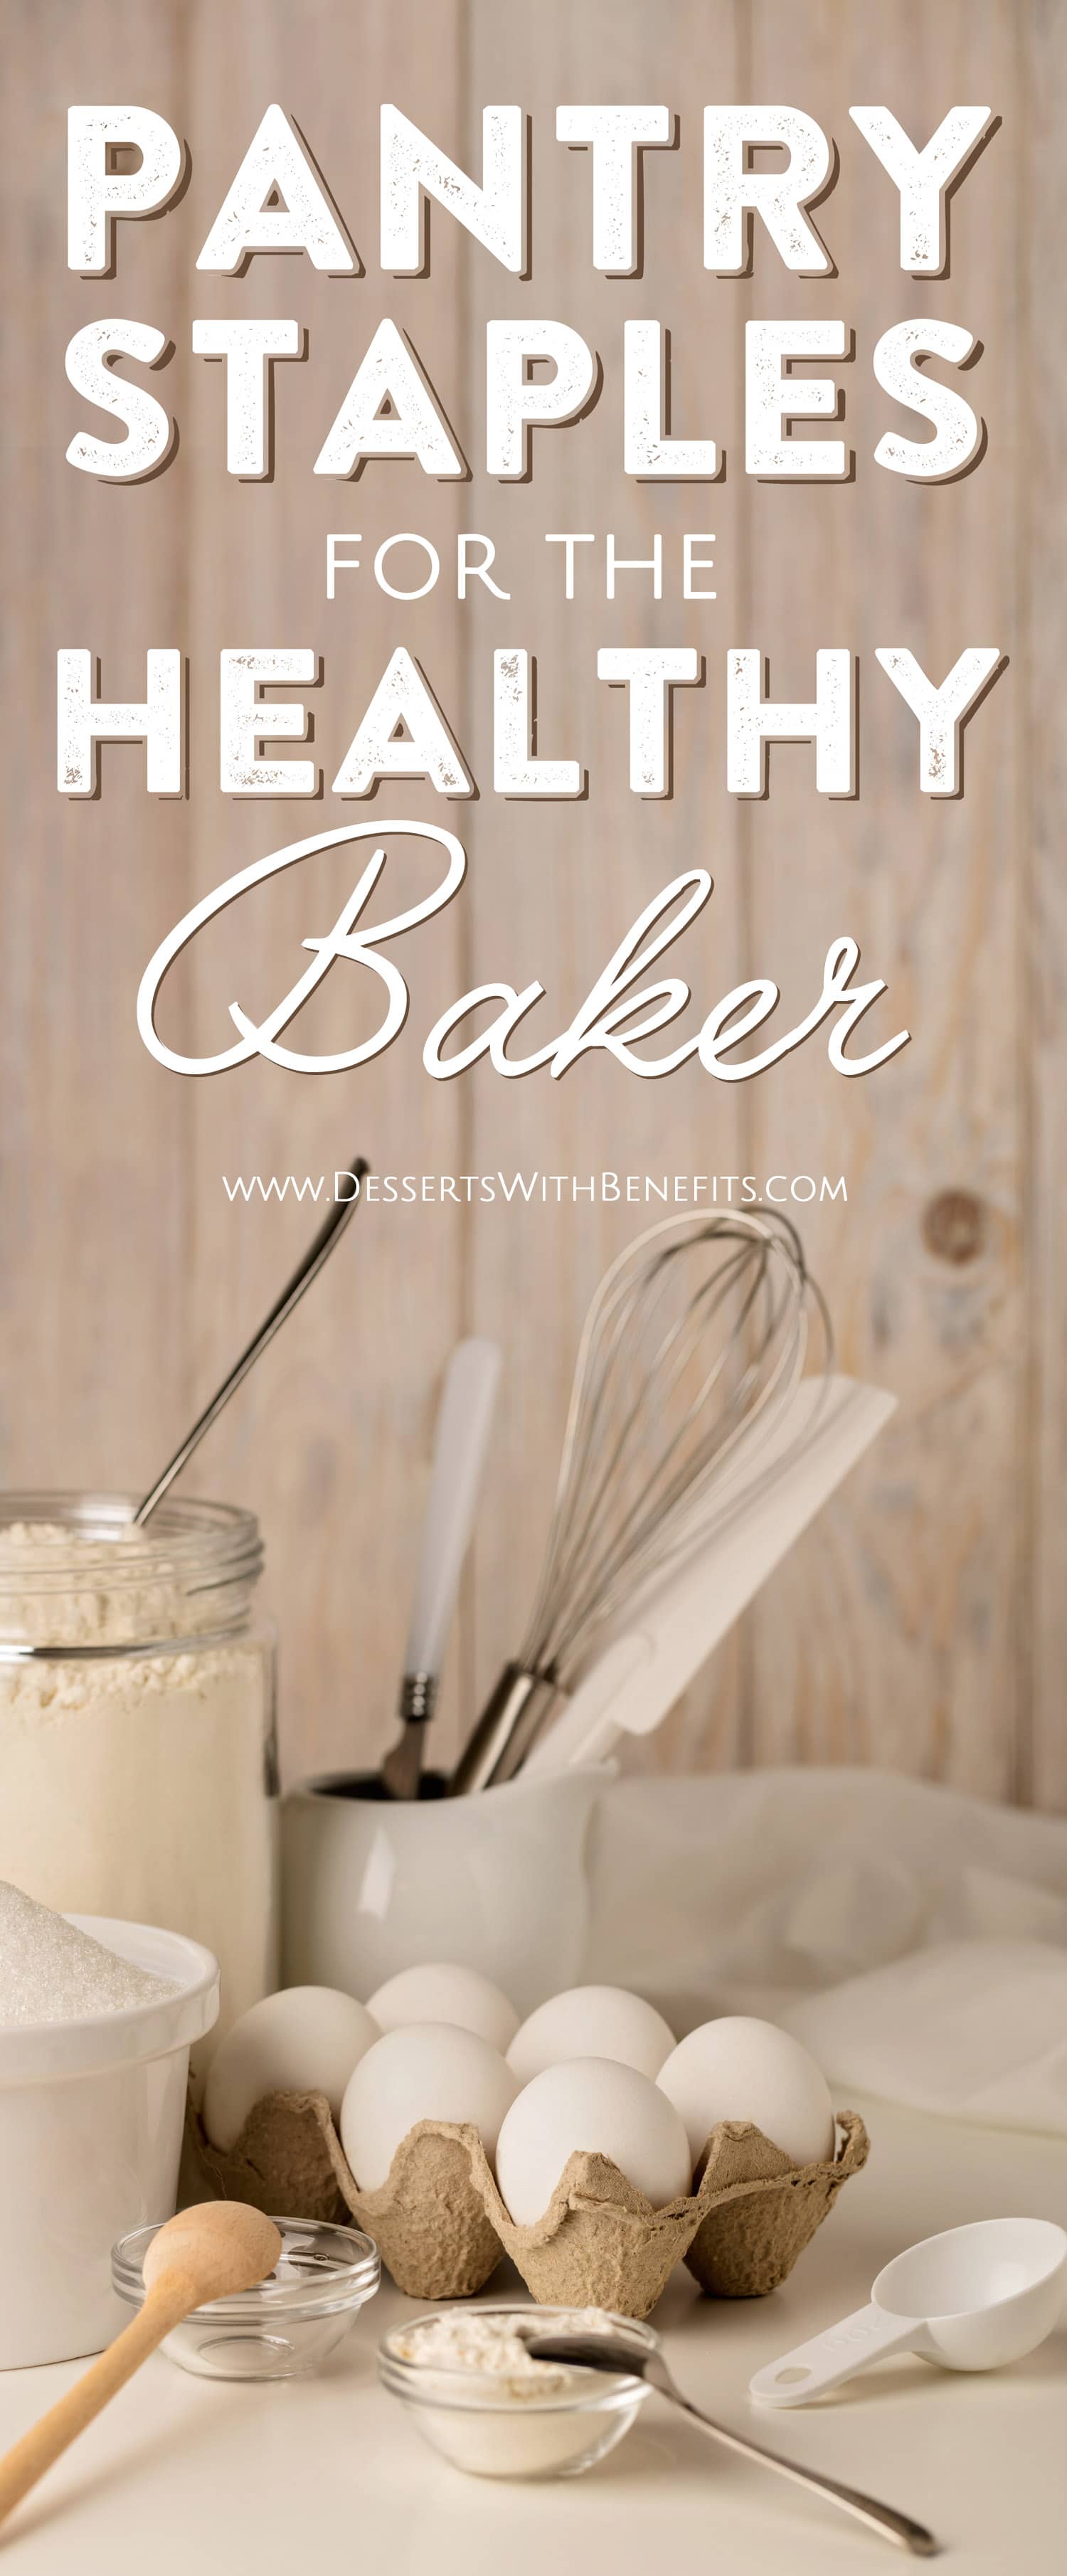 Healthy Pantry Staples for the Healthy Baker: an in-depth look of the ingredients I keep in my pantry, fridge, and freezer to live a healthy lifestyle and bake delicious sweet treats. If you’ve ever wondered how you can live a healthy lifestyle with dessert on the side, this is the guide for you! Healthy Dessert Recipes at the Desserts With Benefits Blog (www.DessertsWithBenefits.com)